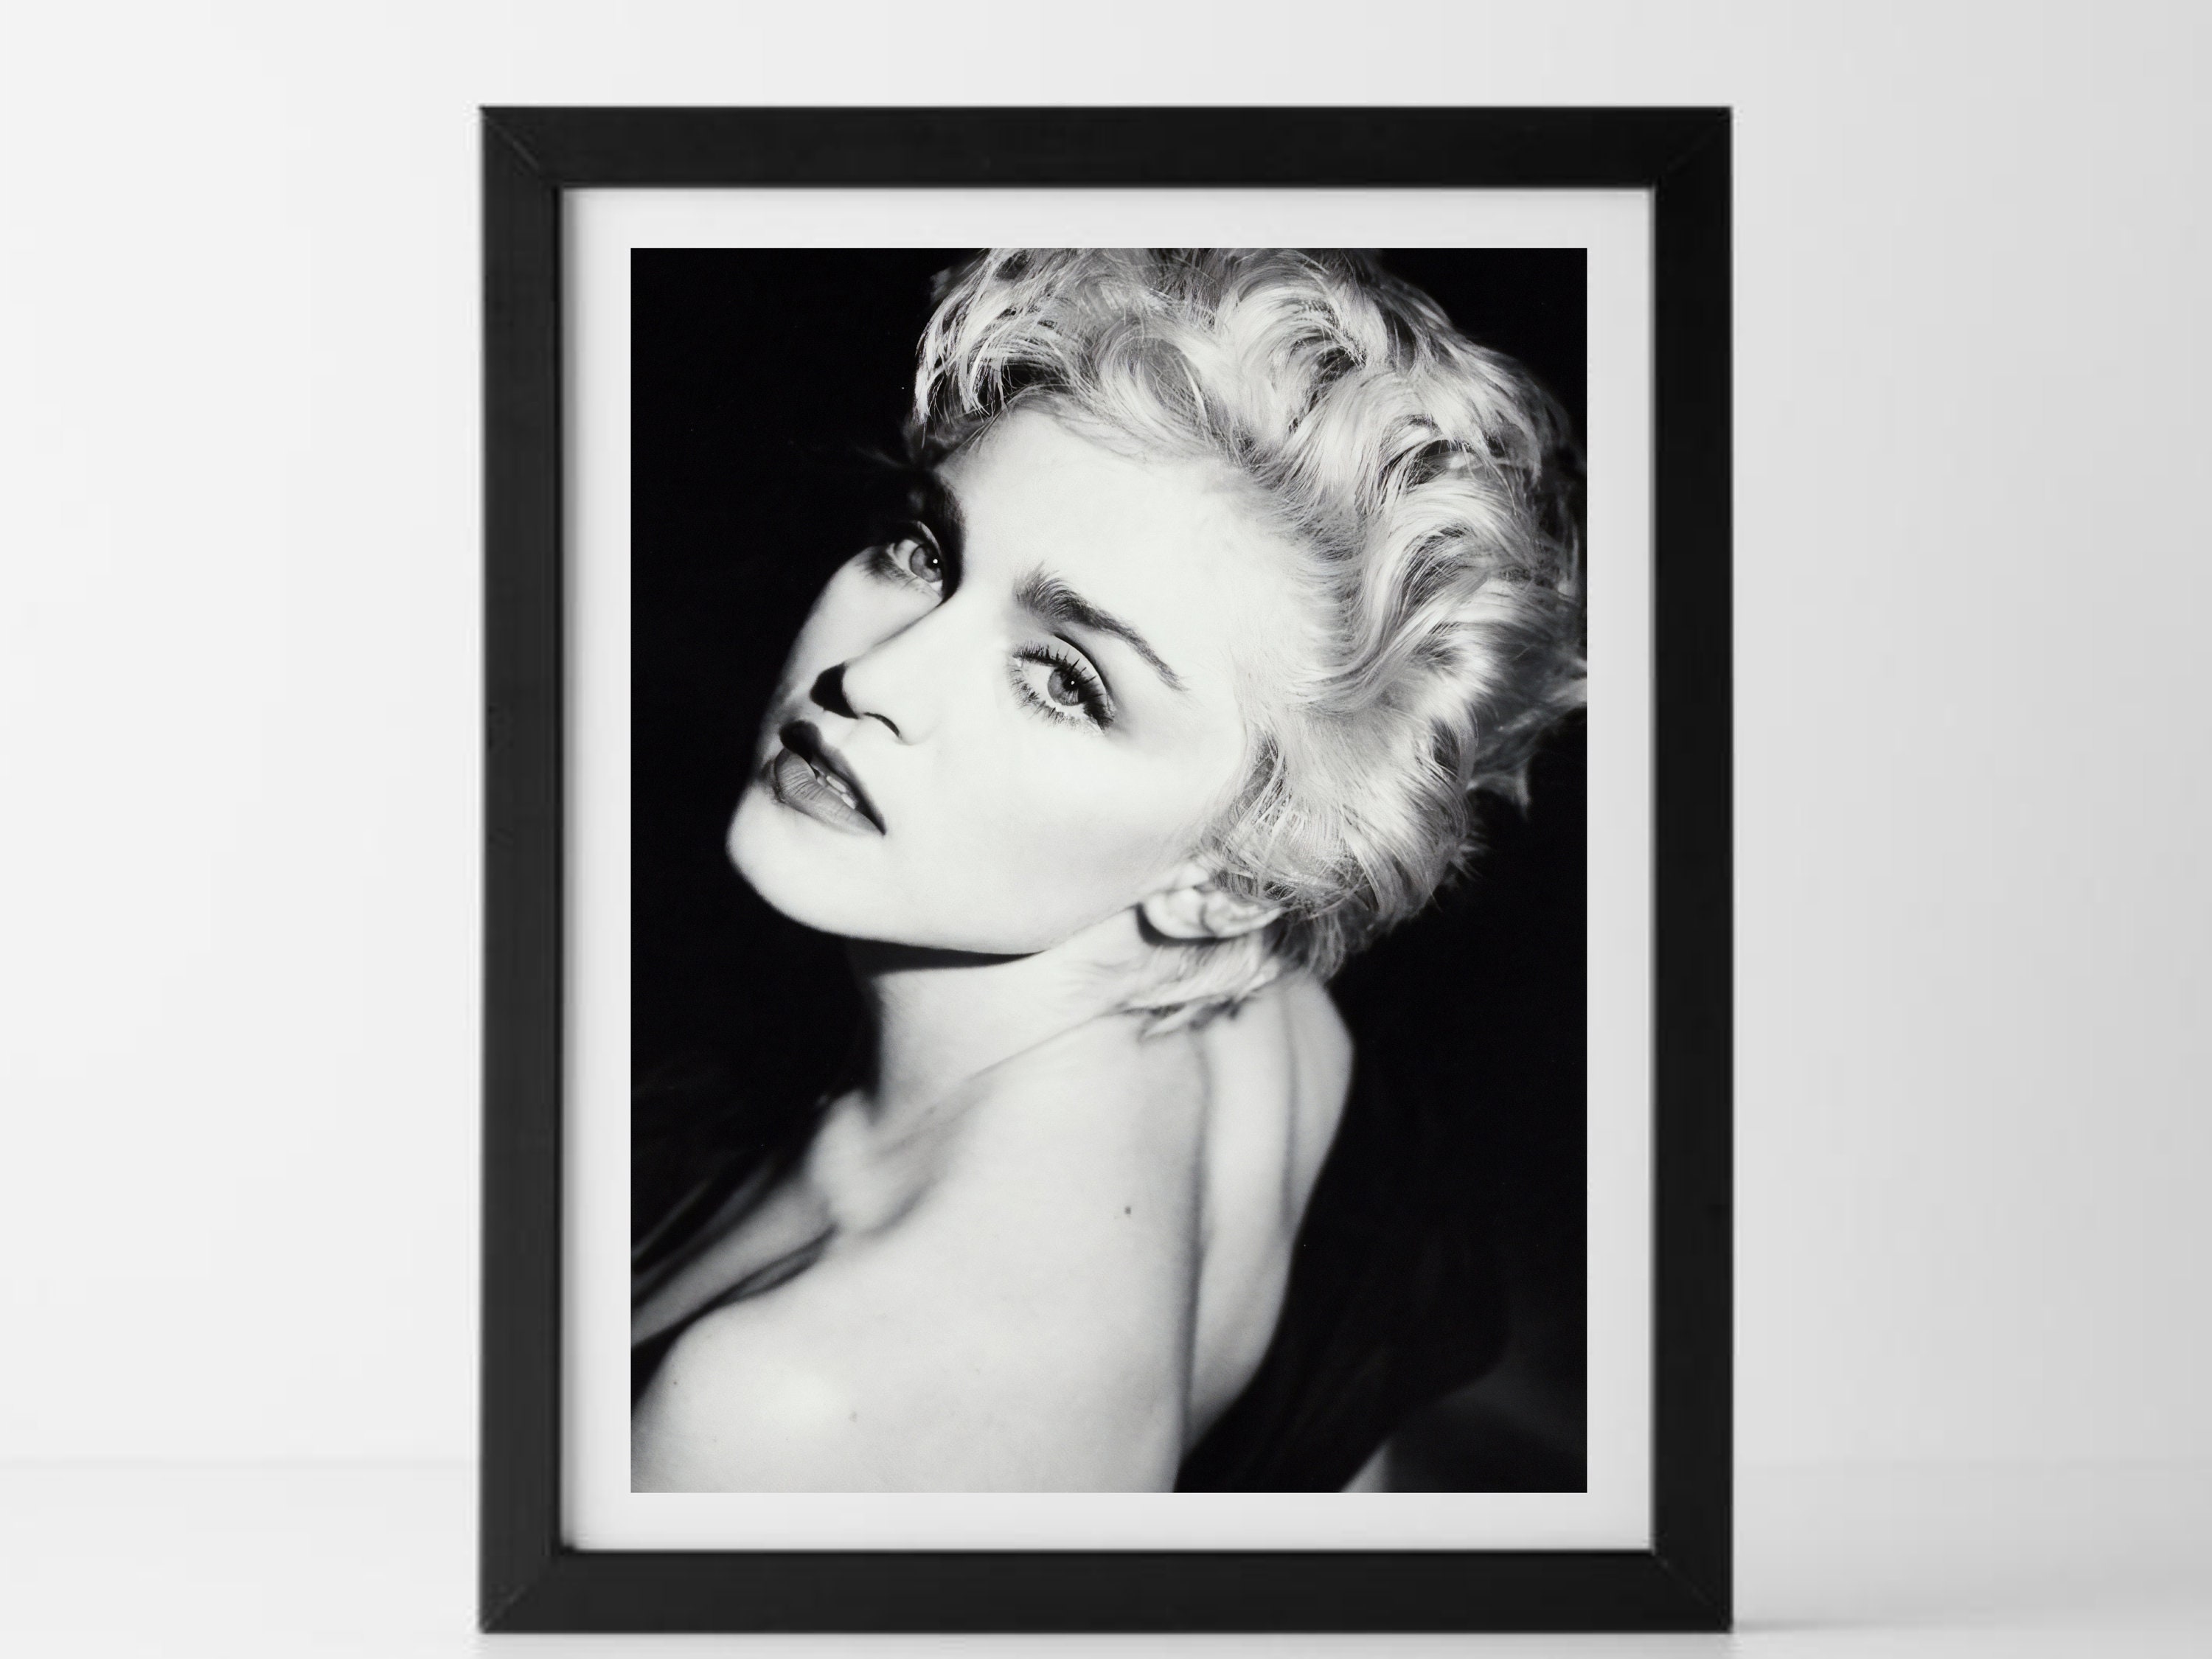 A1 - A5 SIZES AVAILABLE MADONNA BLACK AND WHITE GLOSSY WALL ART POSTER PRINT